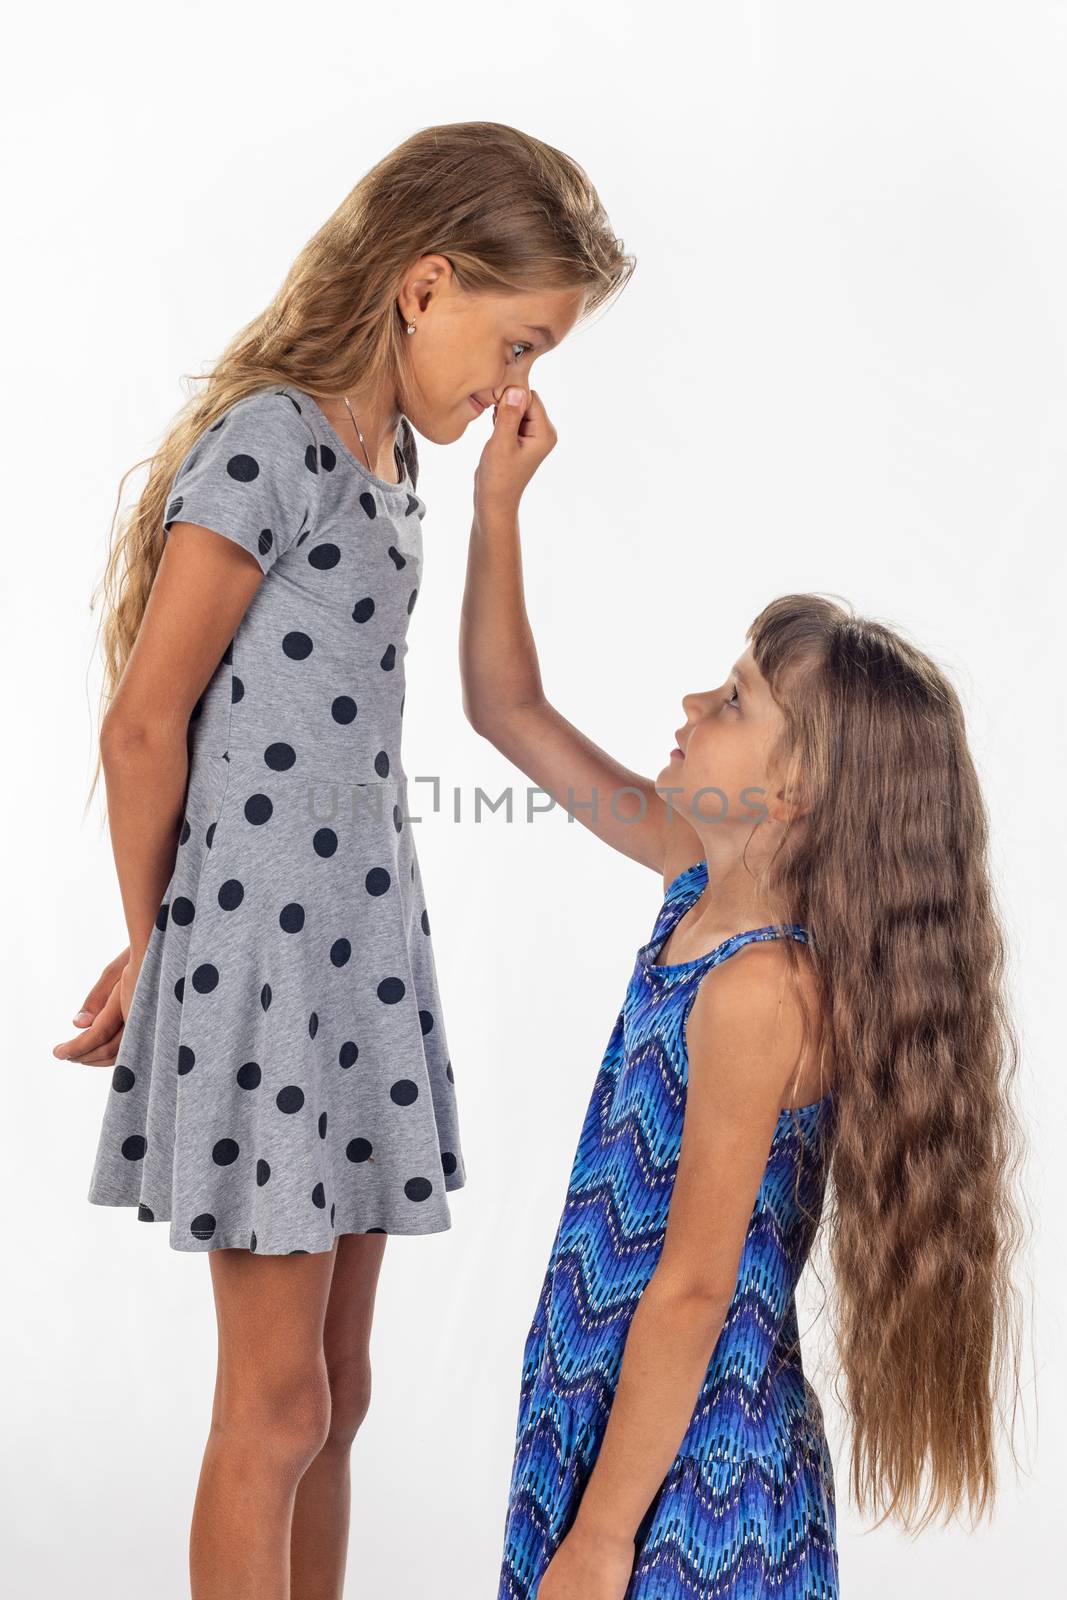 Two girls, one stood on a chair and the other holds the first by the nose